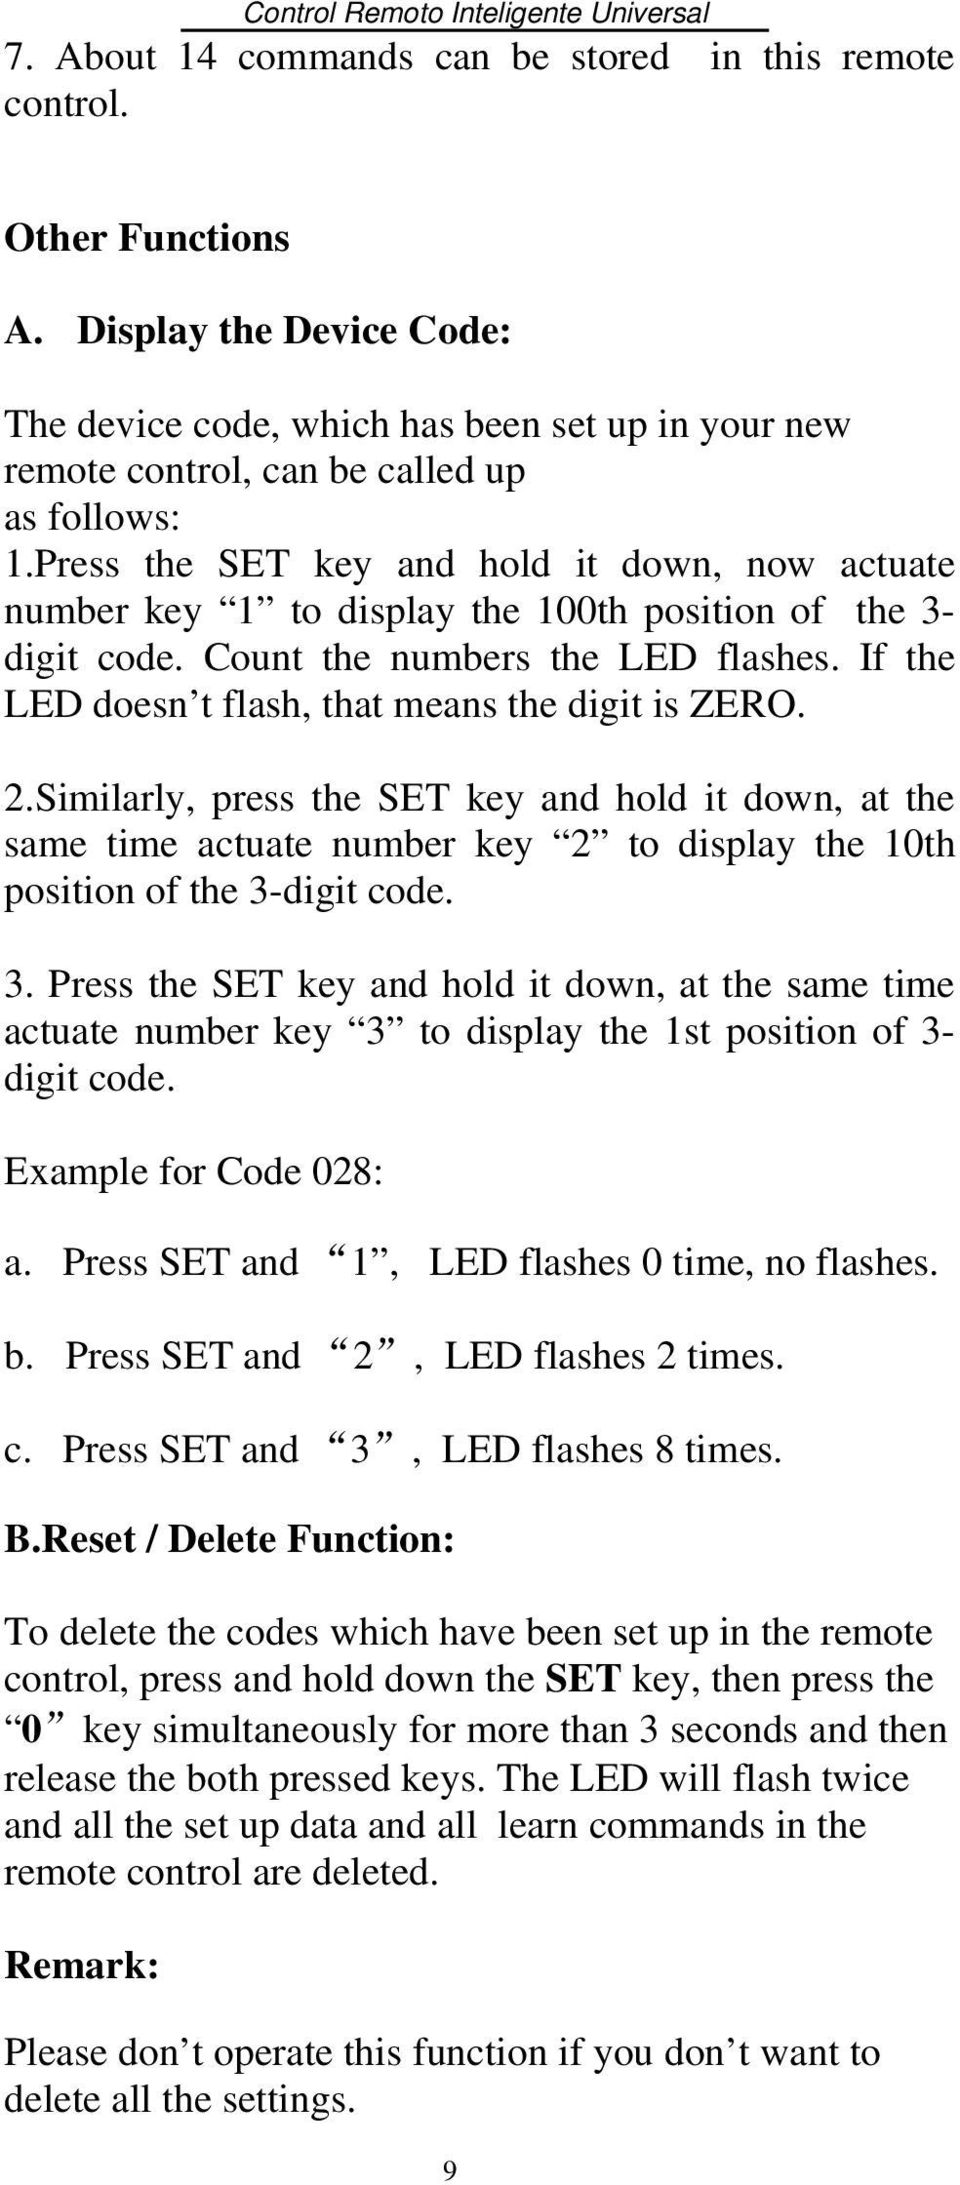 Press the SET key and hold it down, now actuate number key 1 to display the 100th position of the 3- digit code. Count the numbers the LED flashes.